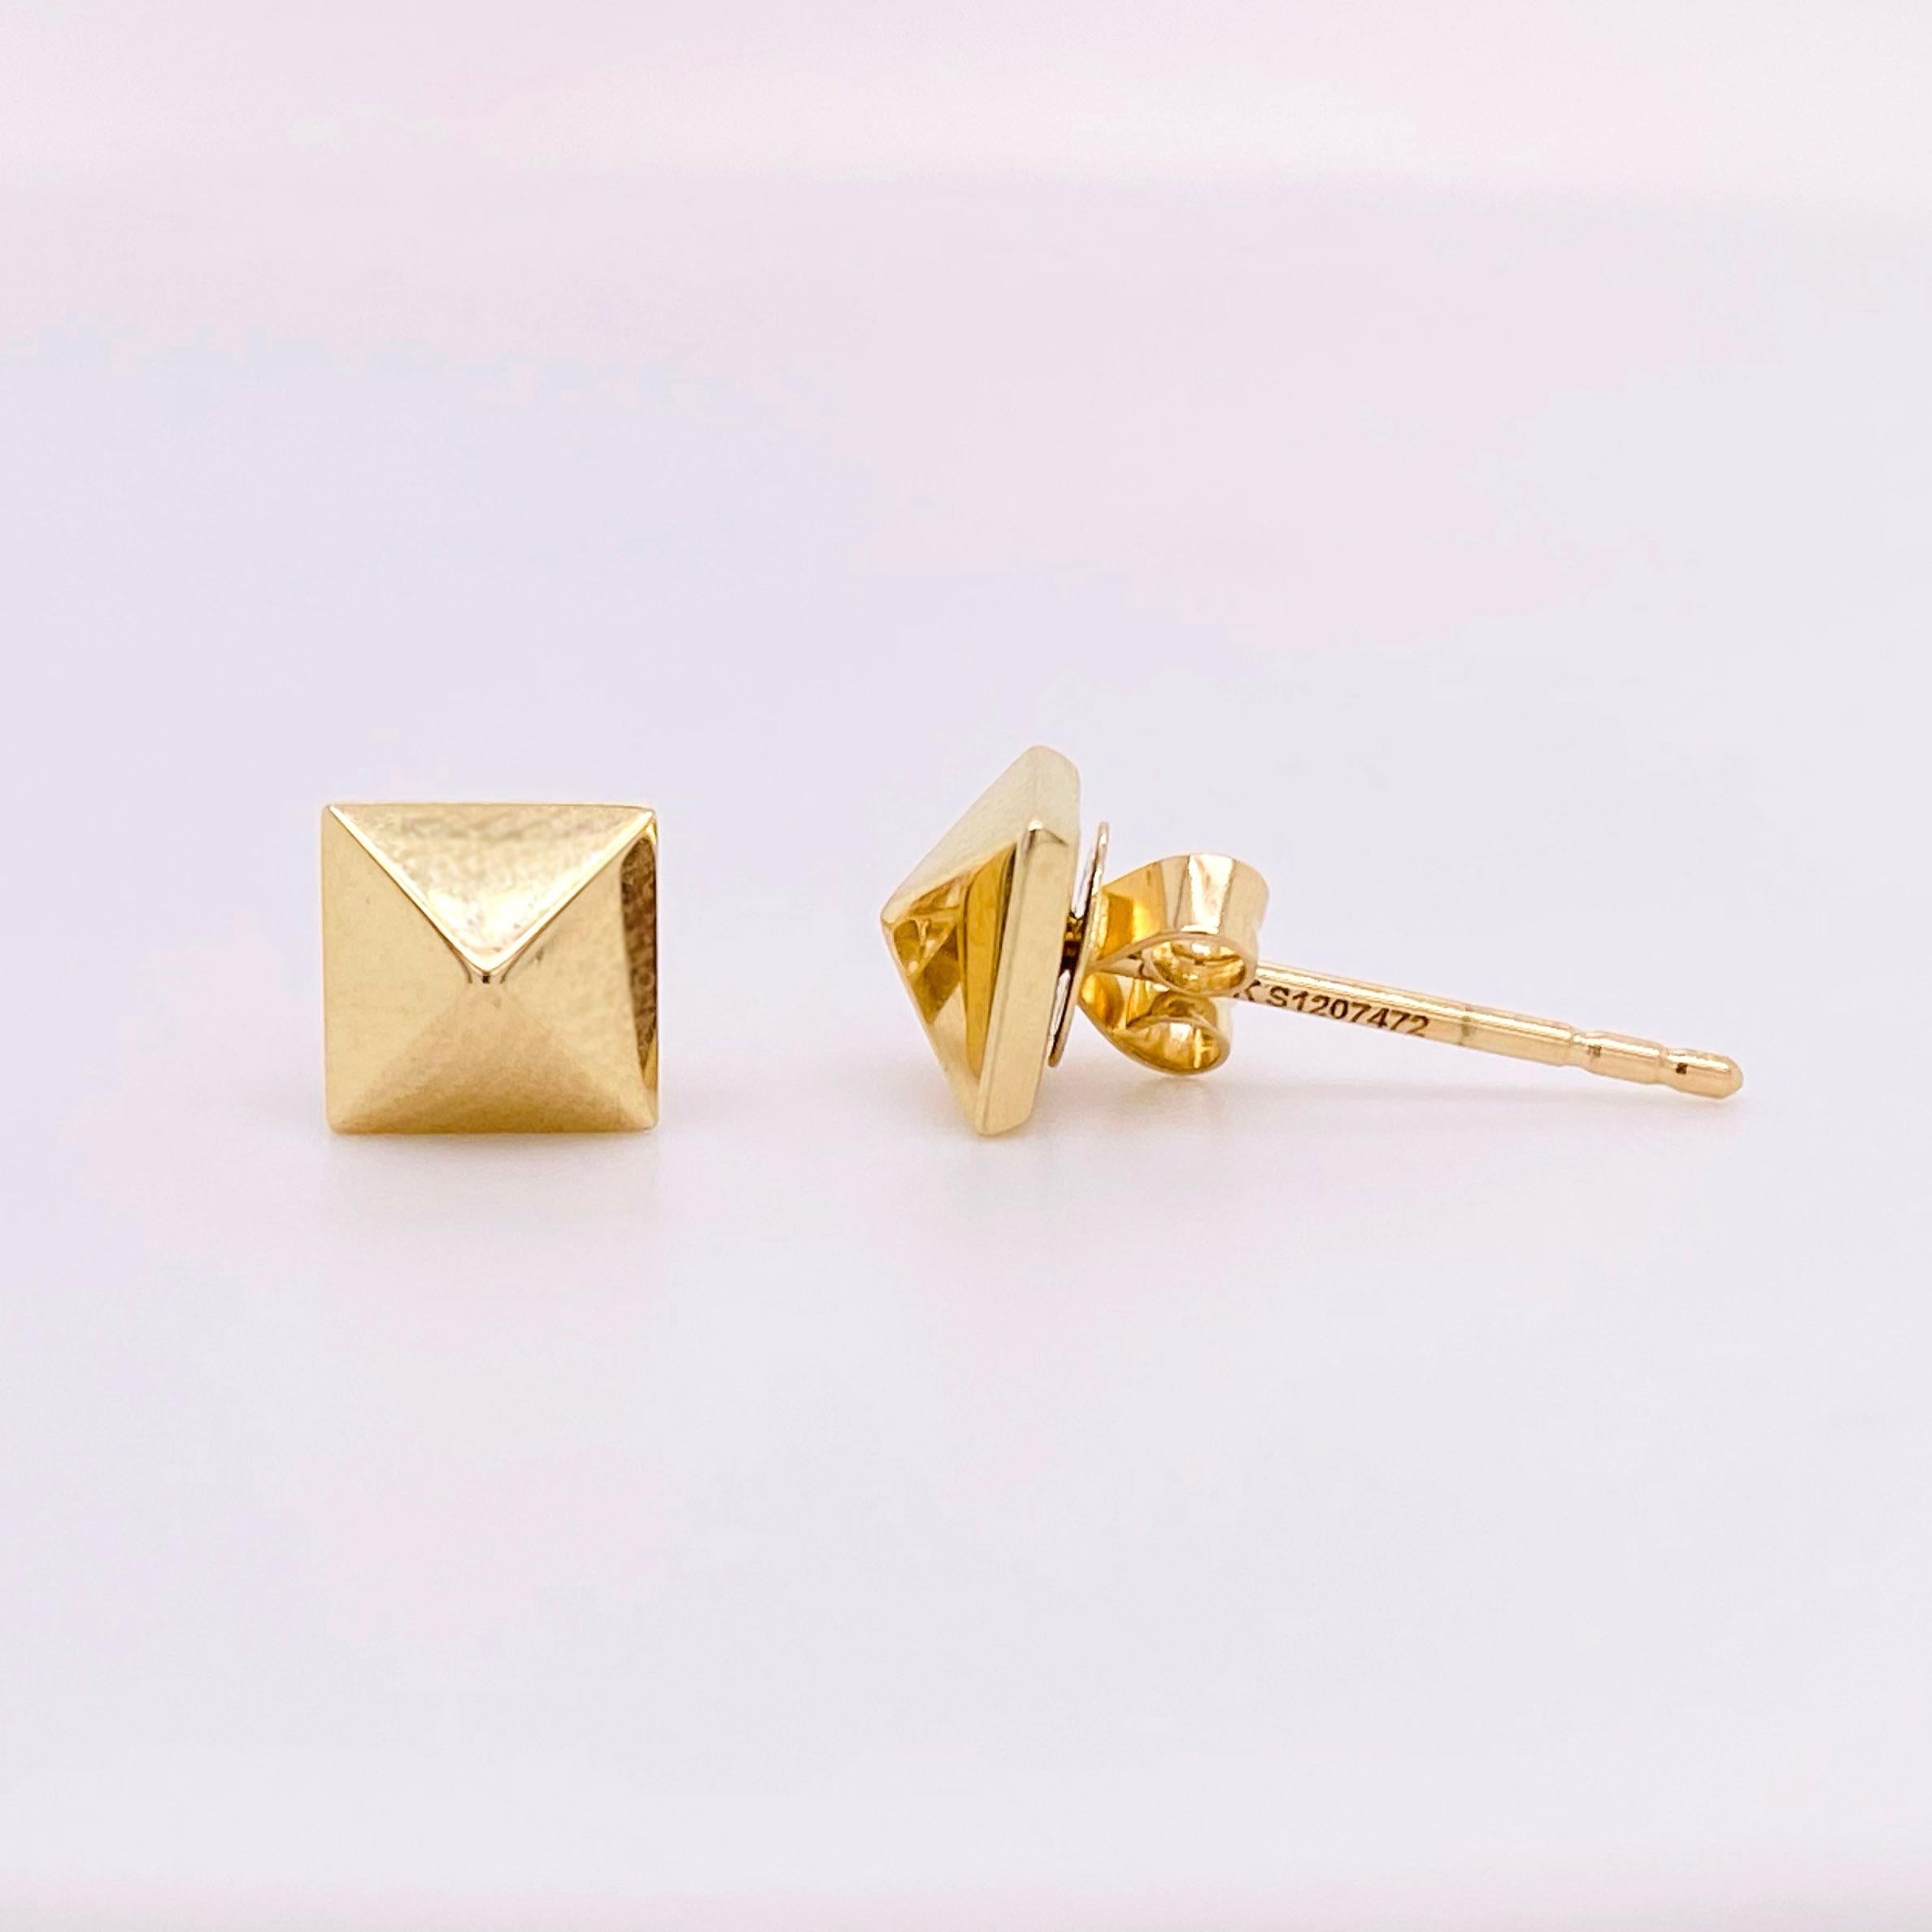 Modern Square Pyramid Earrings, 14 Karat Yellow Gold Pyramid Stud Earrings, Post Square For Sale